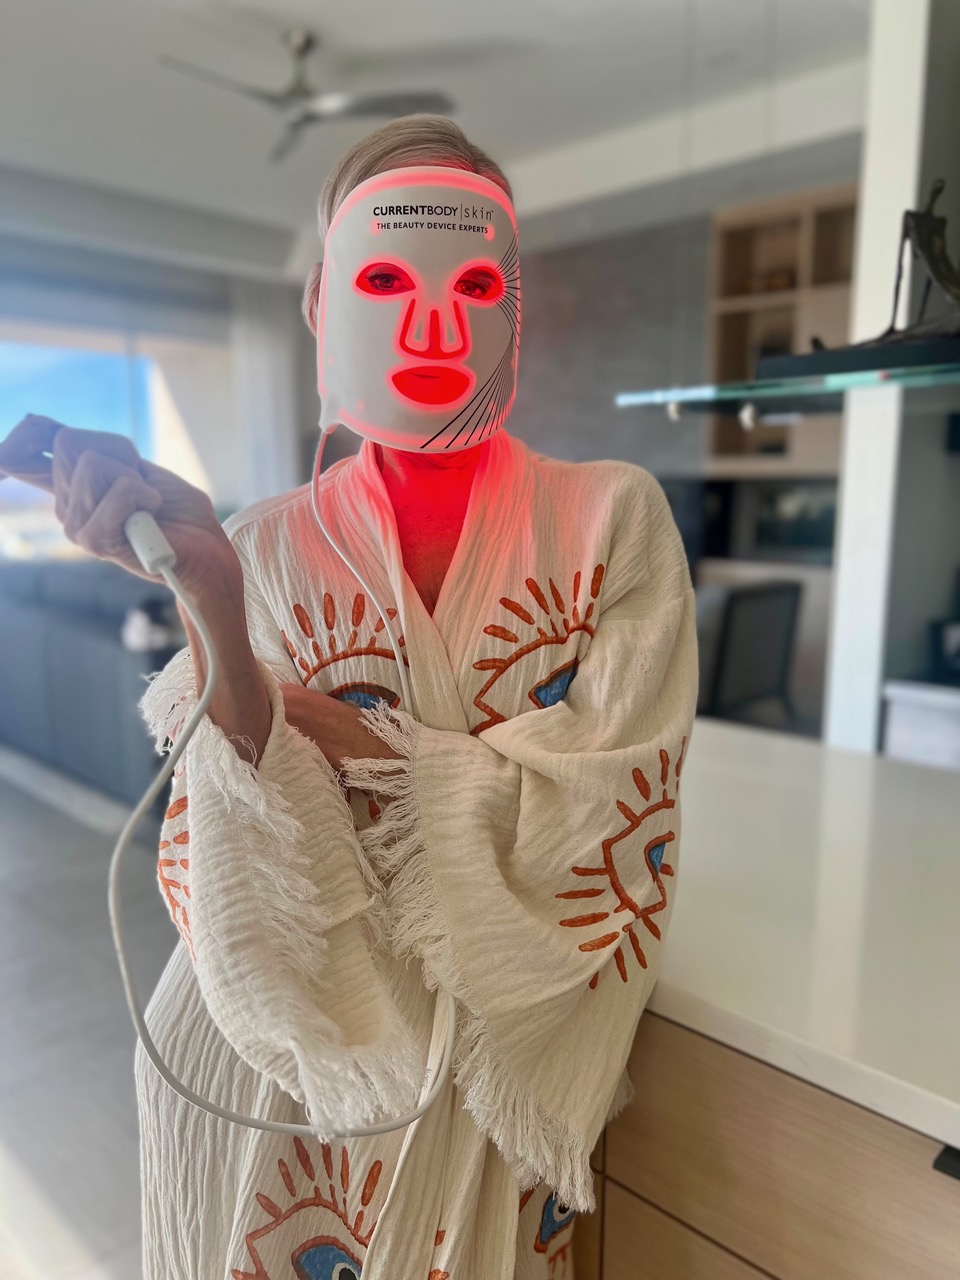 Lifestyle Influencer, Jamie Lewinger of More Than Turquoise wearing the CurrentBody LED Face Mask 